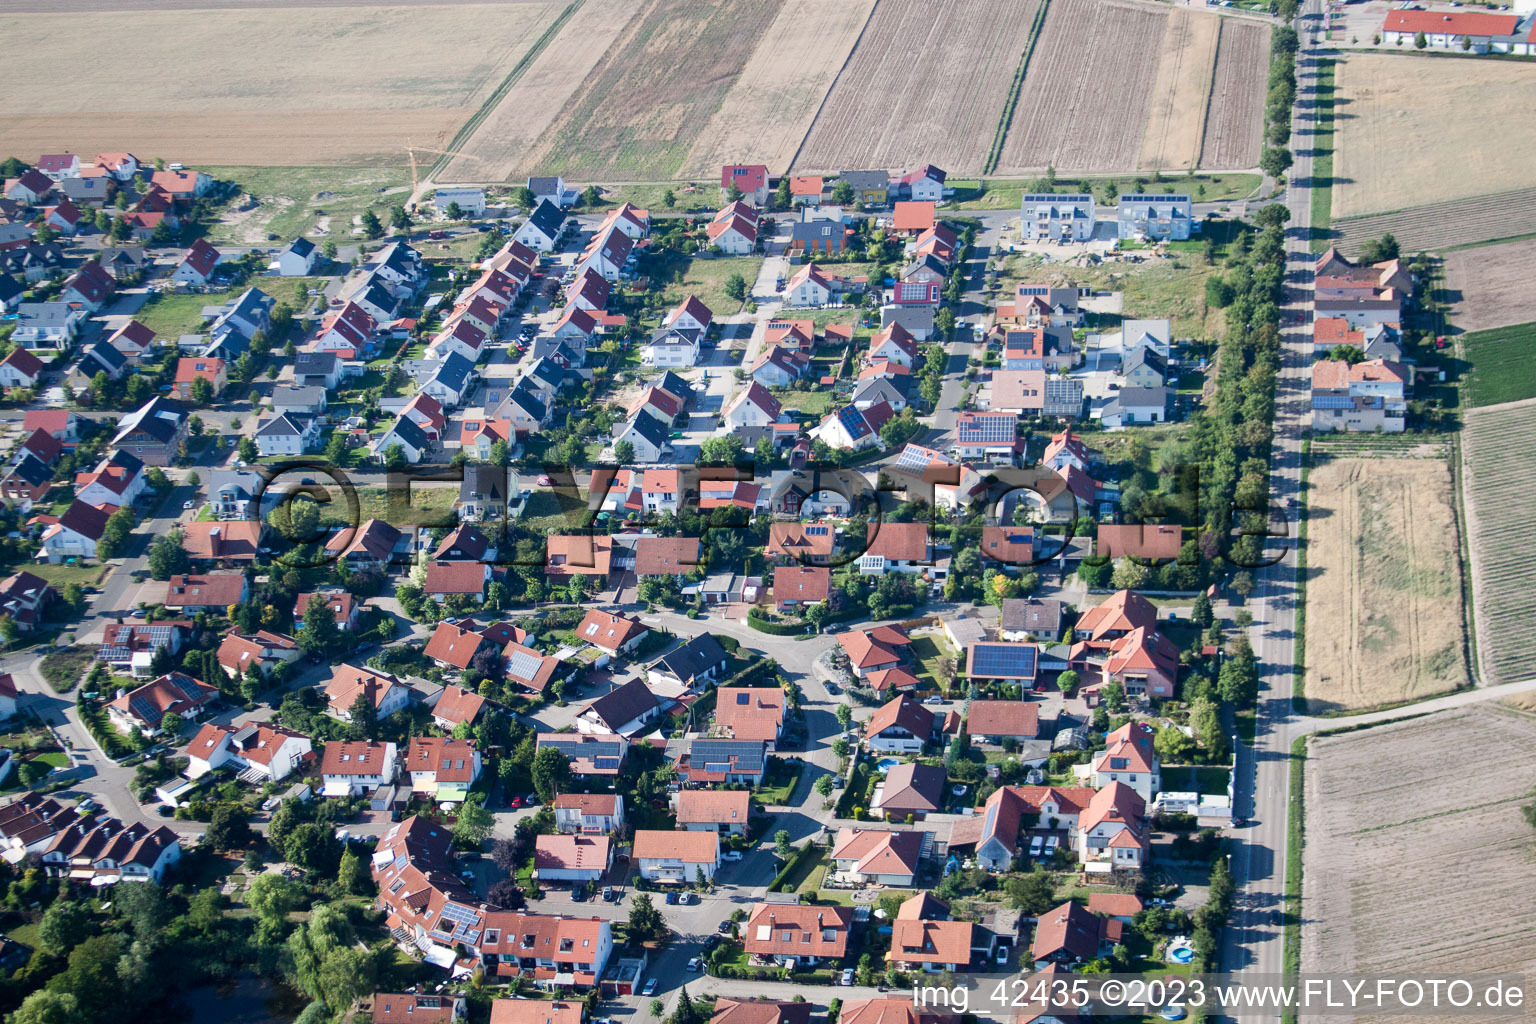 New development area in Rheinzabern in the state Rhineland-Palatinate, Germany from above